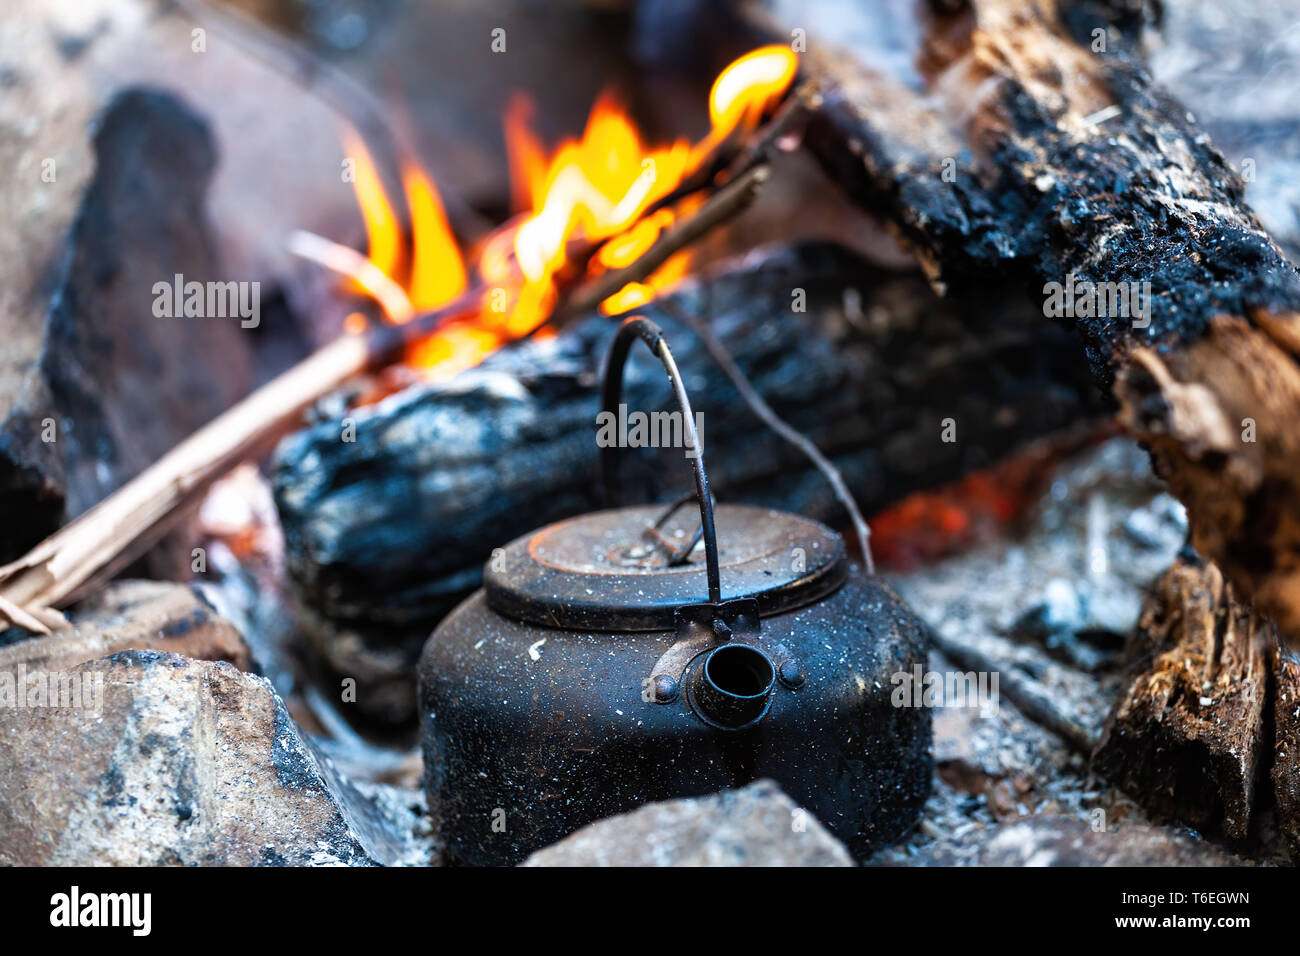 https://c8.alamy.com/comp/T6EGWN/campfire-kettle-closeup-with-blurred-bonfire-in-the-background-T6EGWN.jpg